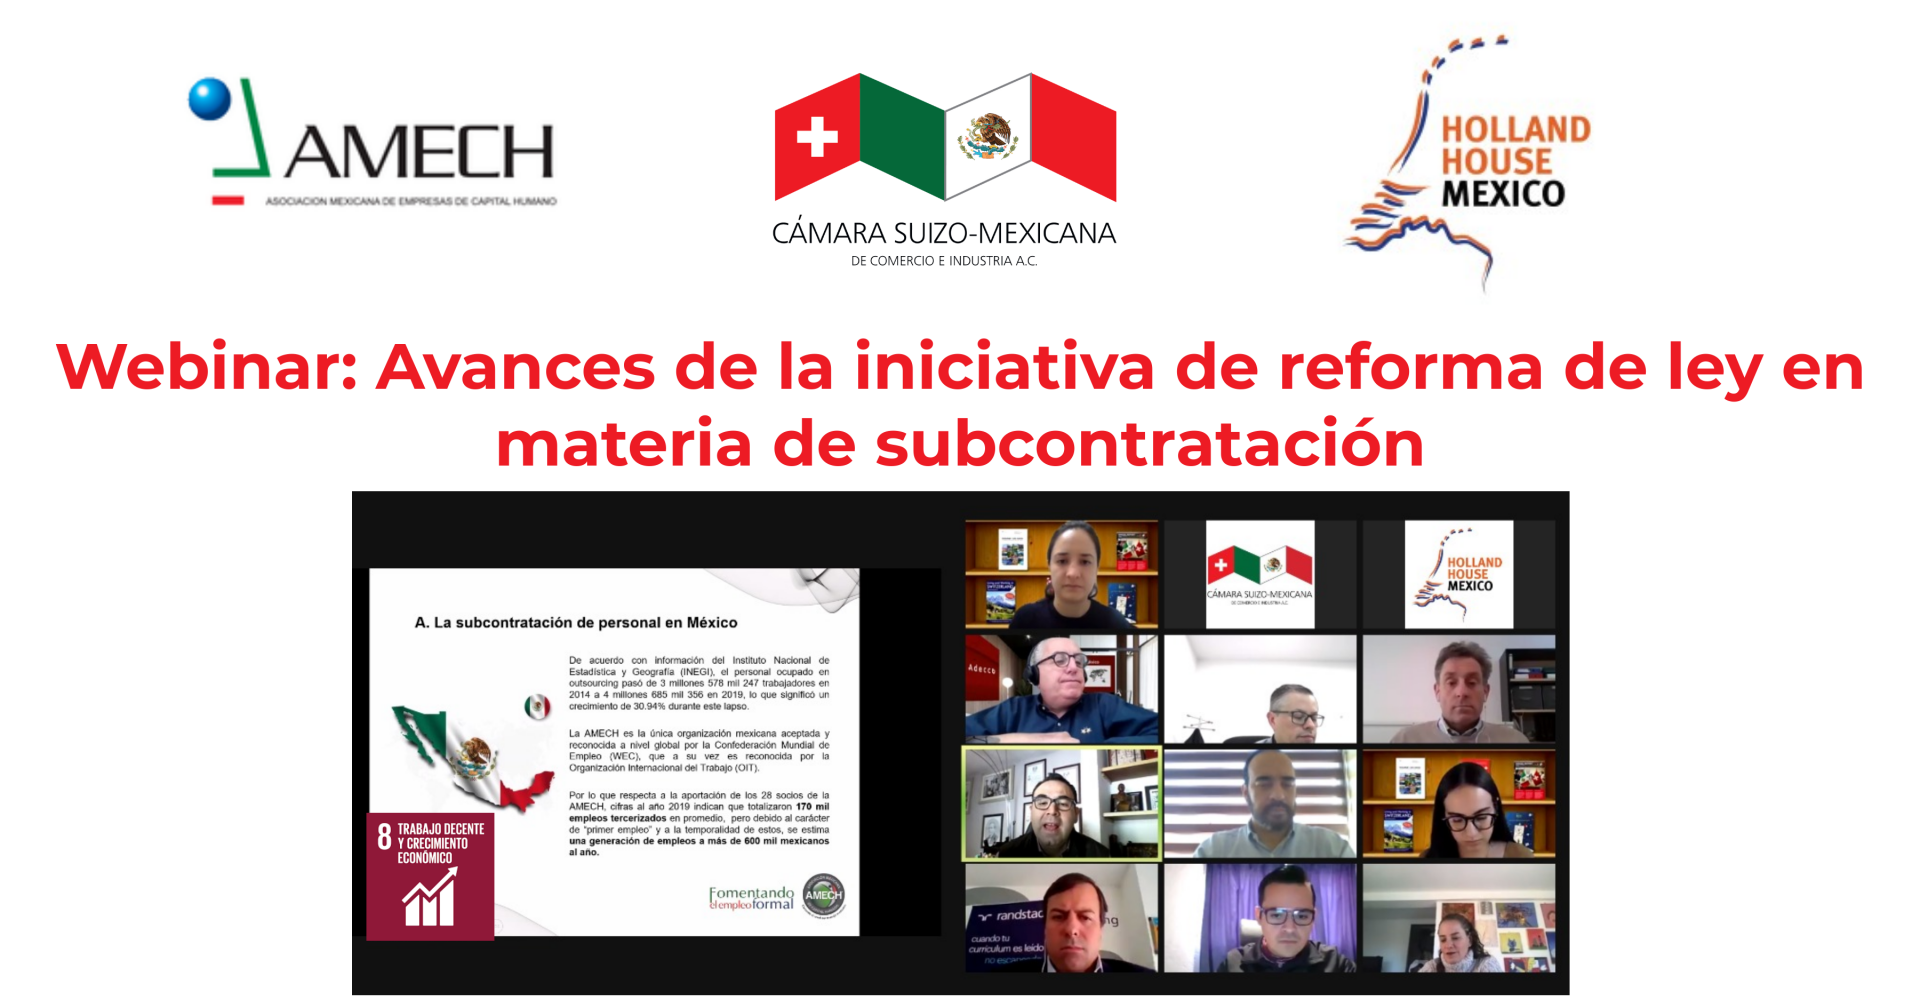 Developments of the Law reform on outsourcing in Mexico